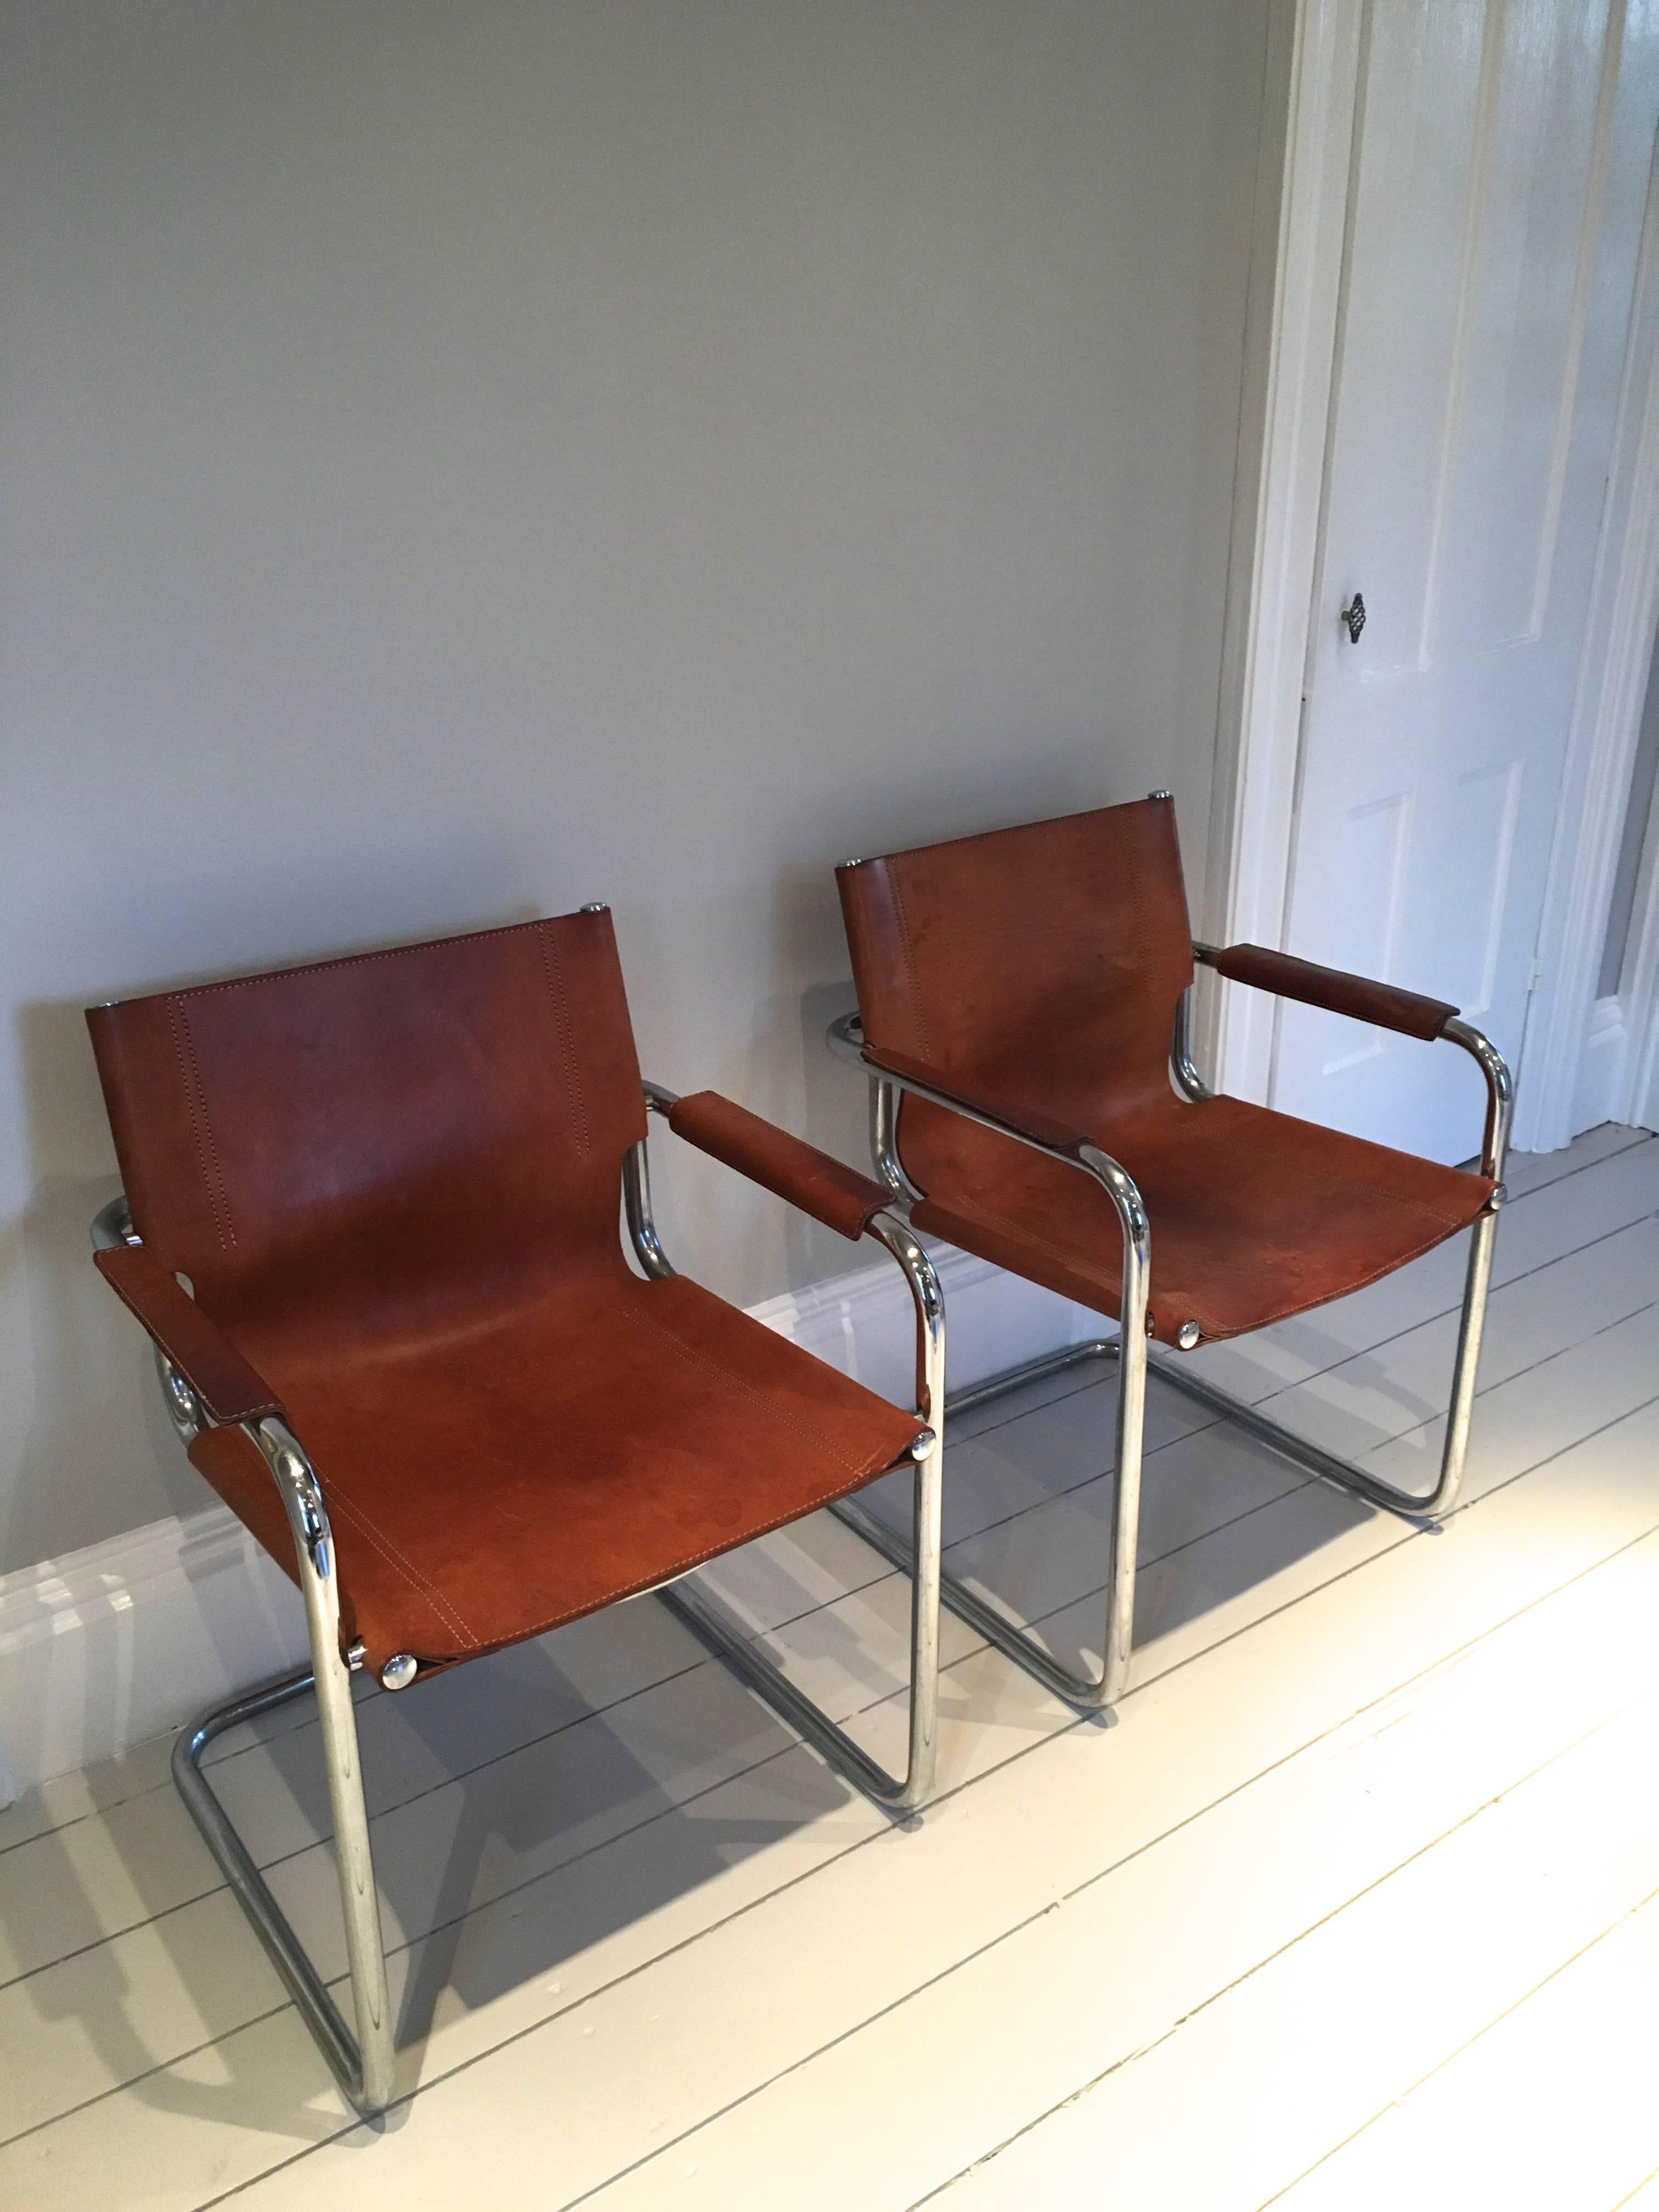 We love these chairs for their softly-worn leather, enduring comfort and small apartment-friendly size. The cognac leather and frames are in lovely condition and the leather patina has great depth and character. Derived from the original S34